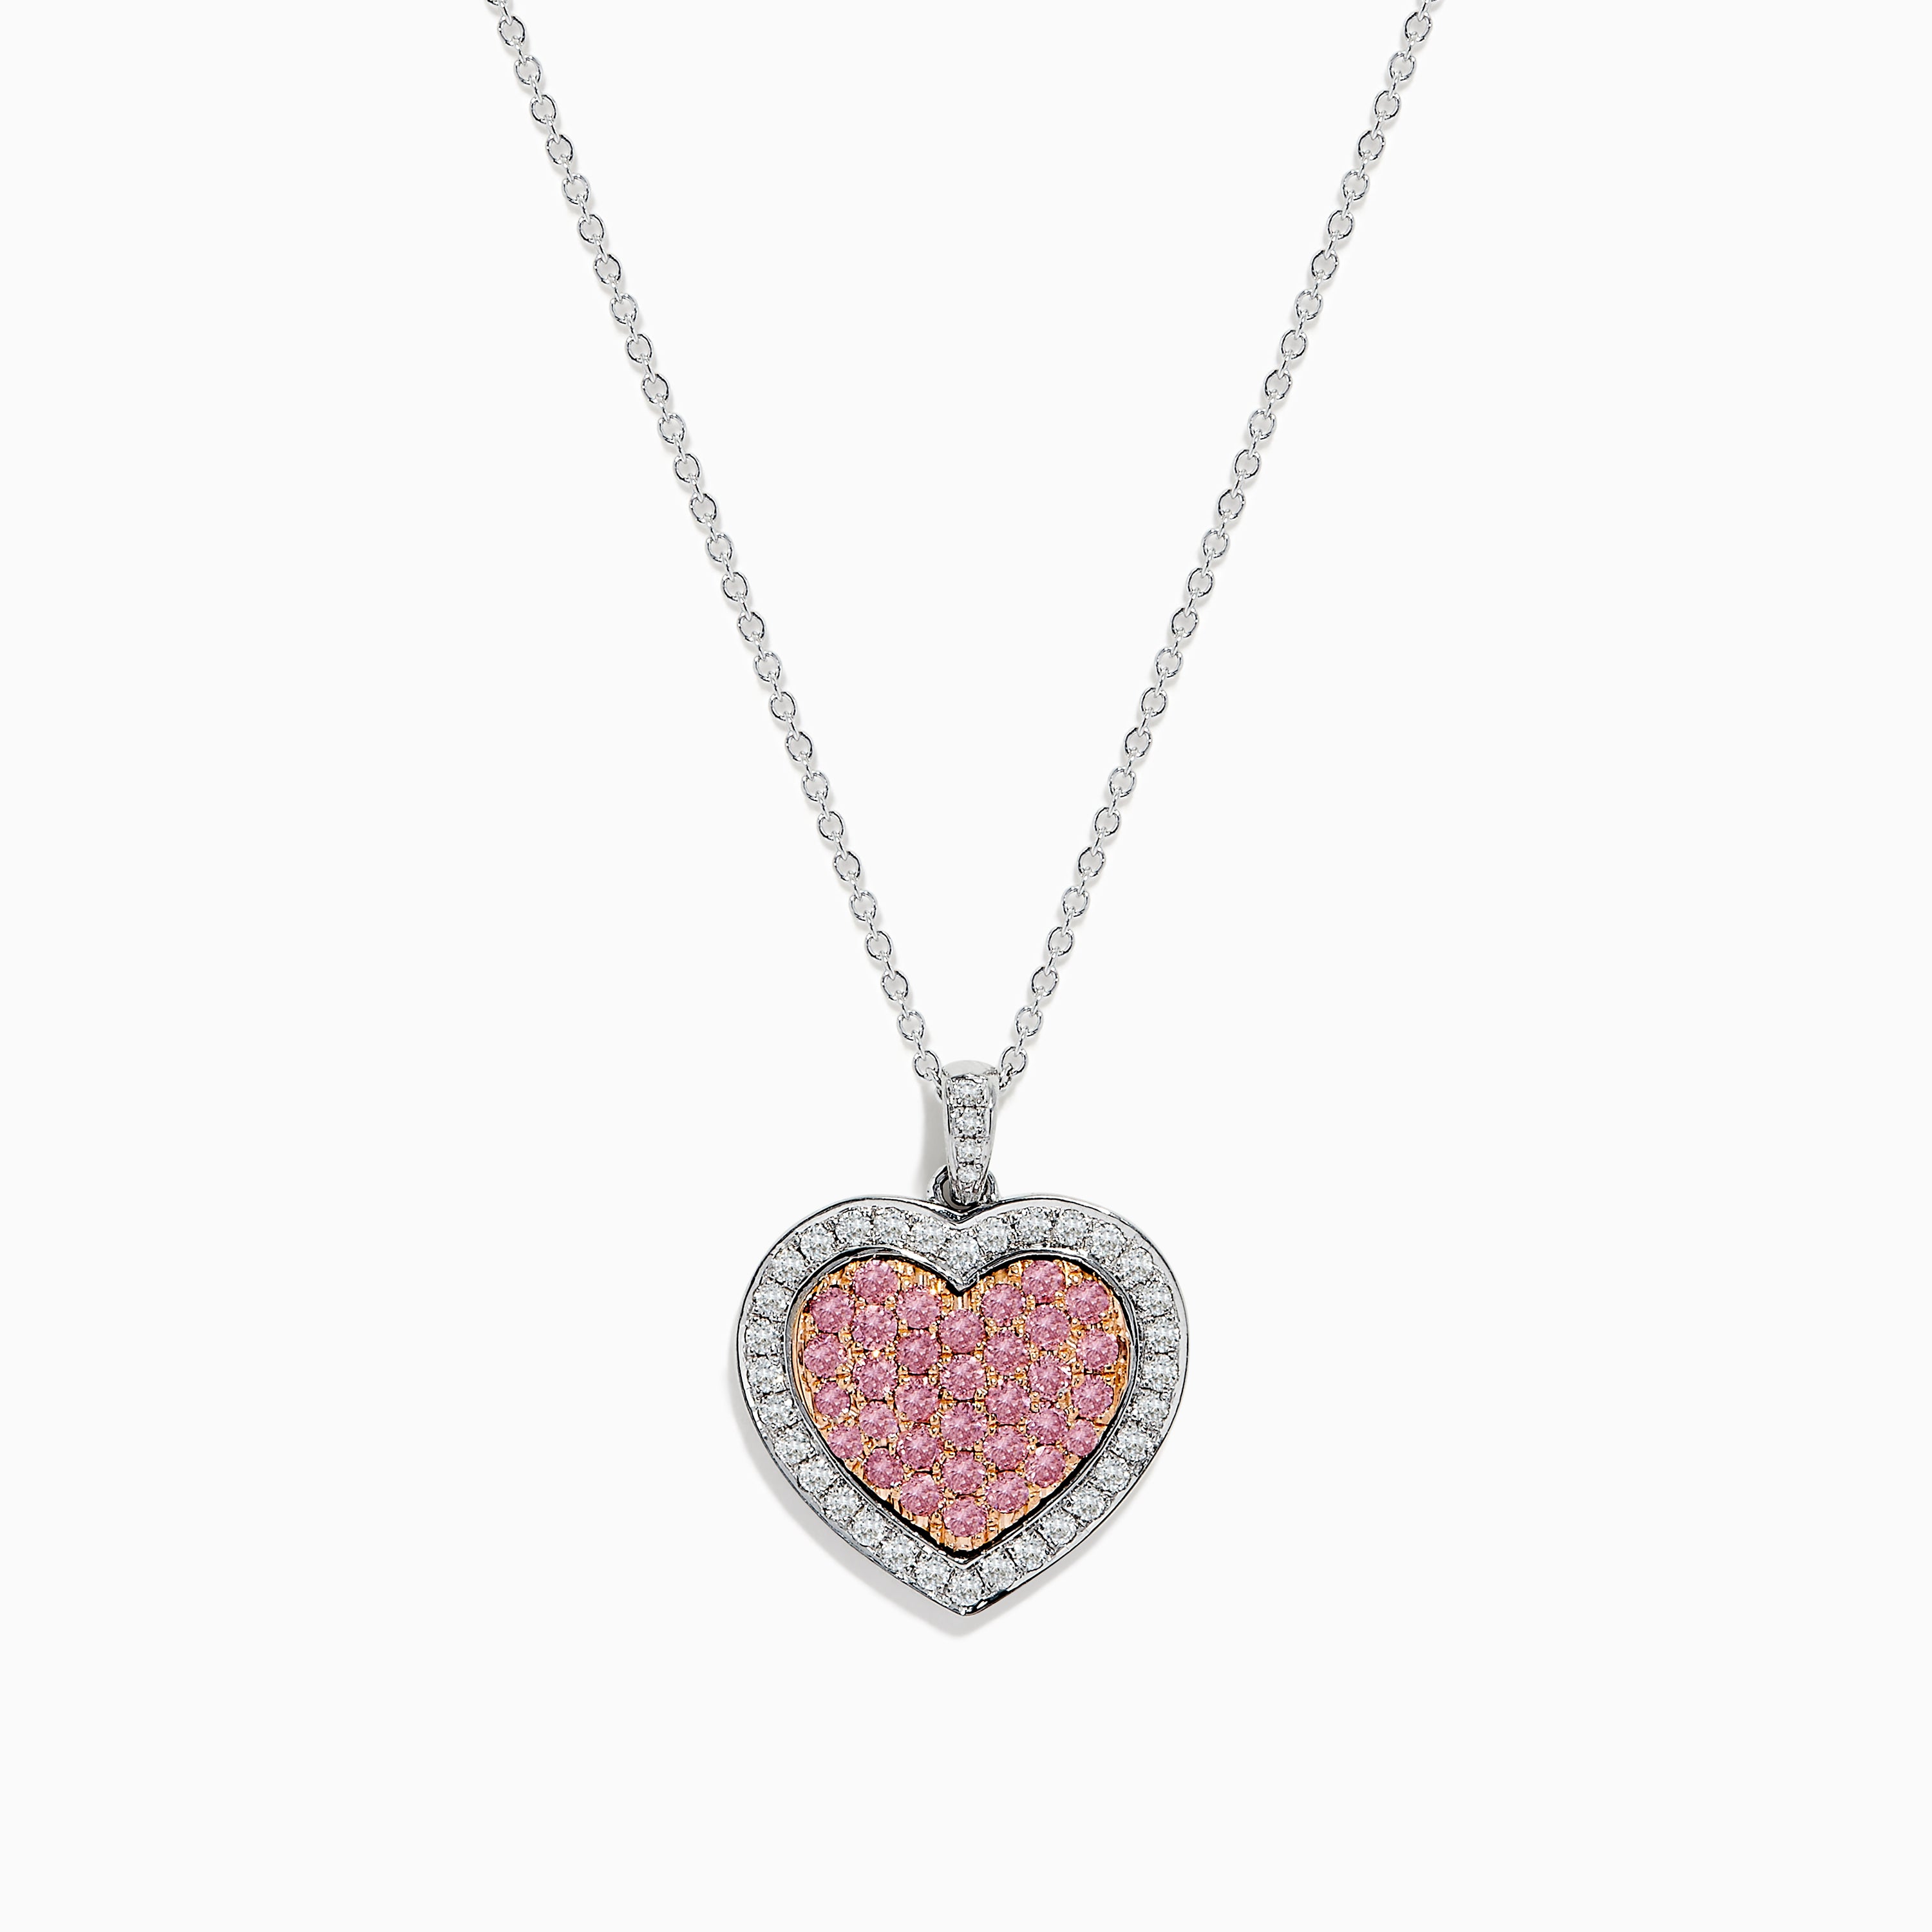 Effy D'Oro by Diamond Pave Diamond Heart Pendant (3/4 ct. t.w.) in 14k Gold  or 14k Rose Gold - ShopStyle Fine Necklaces